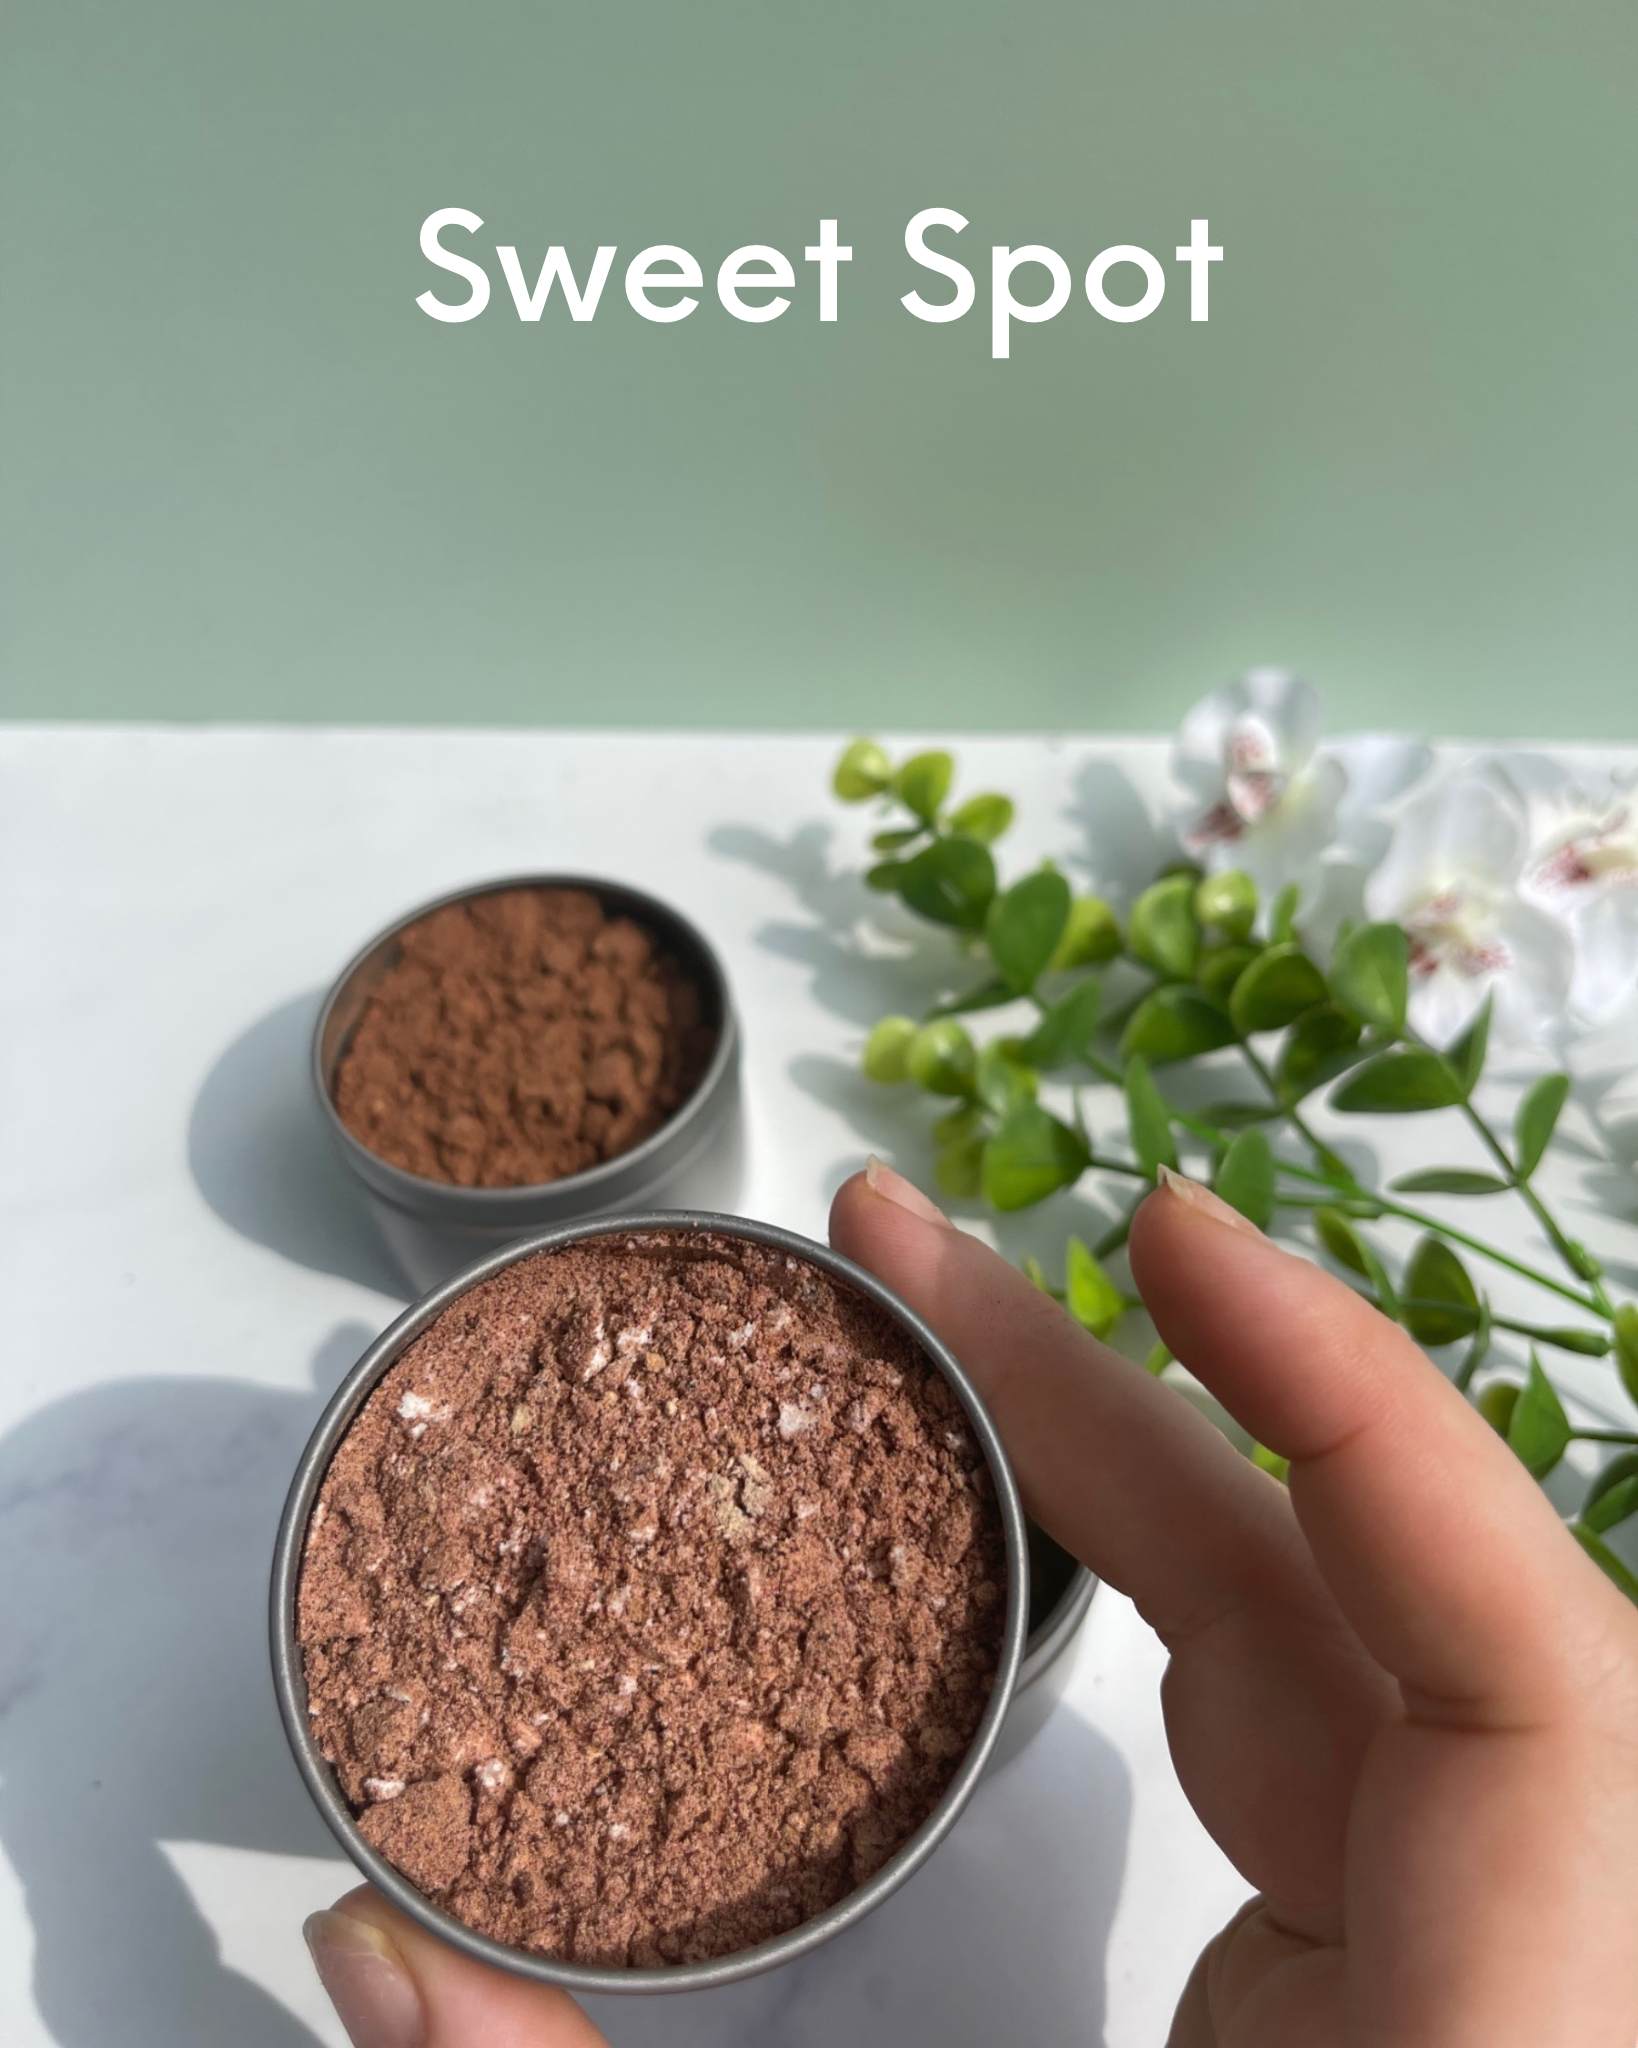 Reads: Sweet Spot. Foreground : hand holding metal tin containing herbal blend. Background: 2 metal tins containing herb blends sitting on marble counter next to flowers